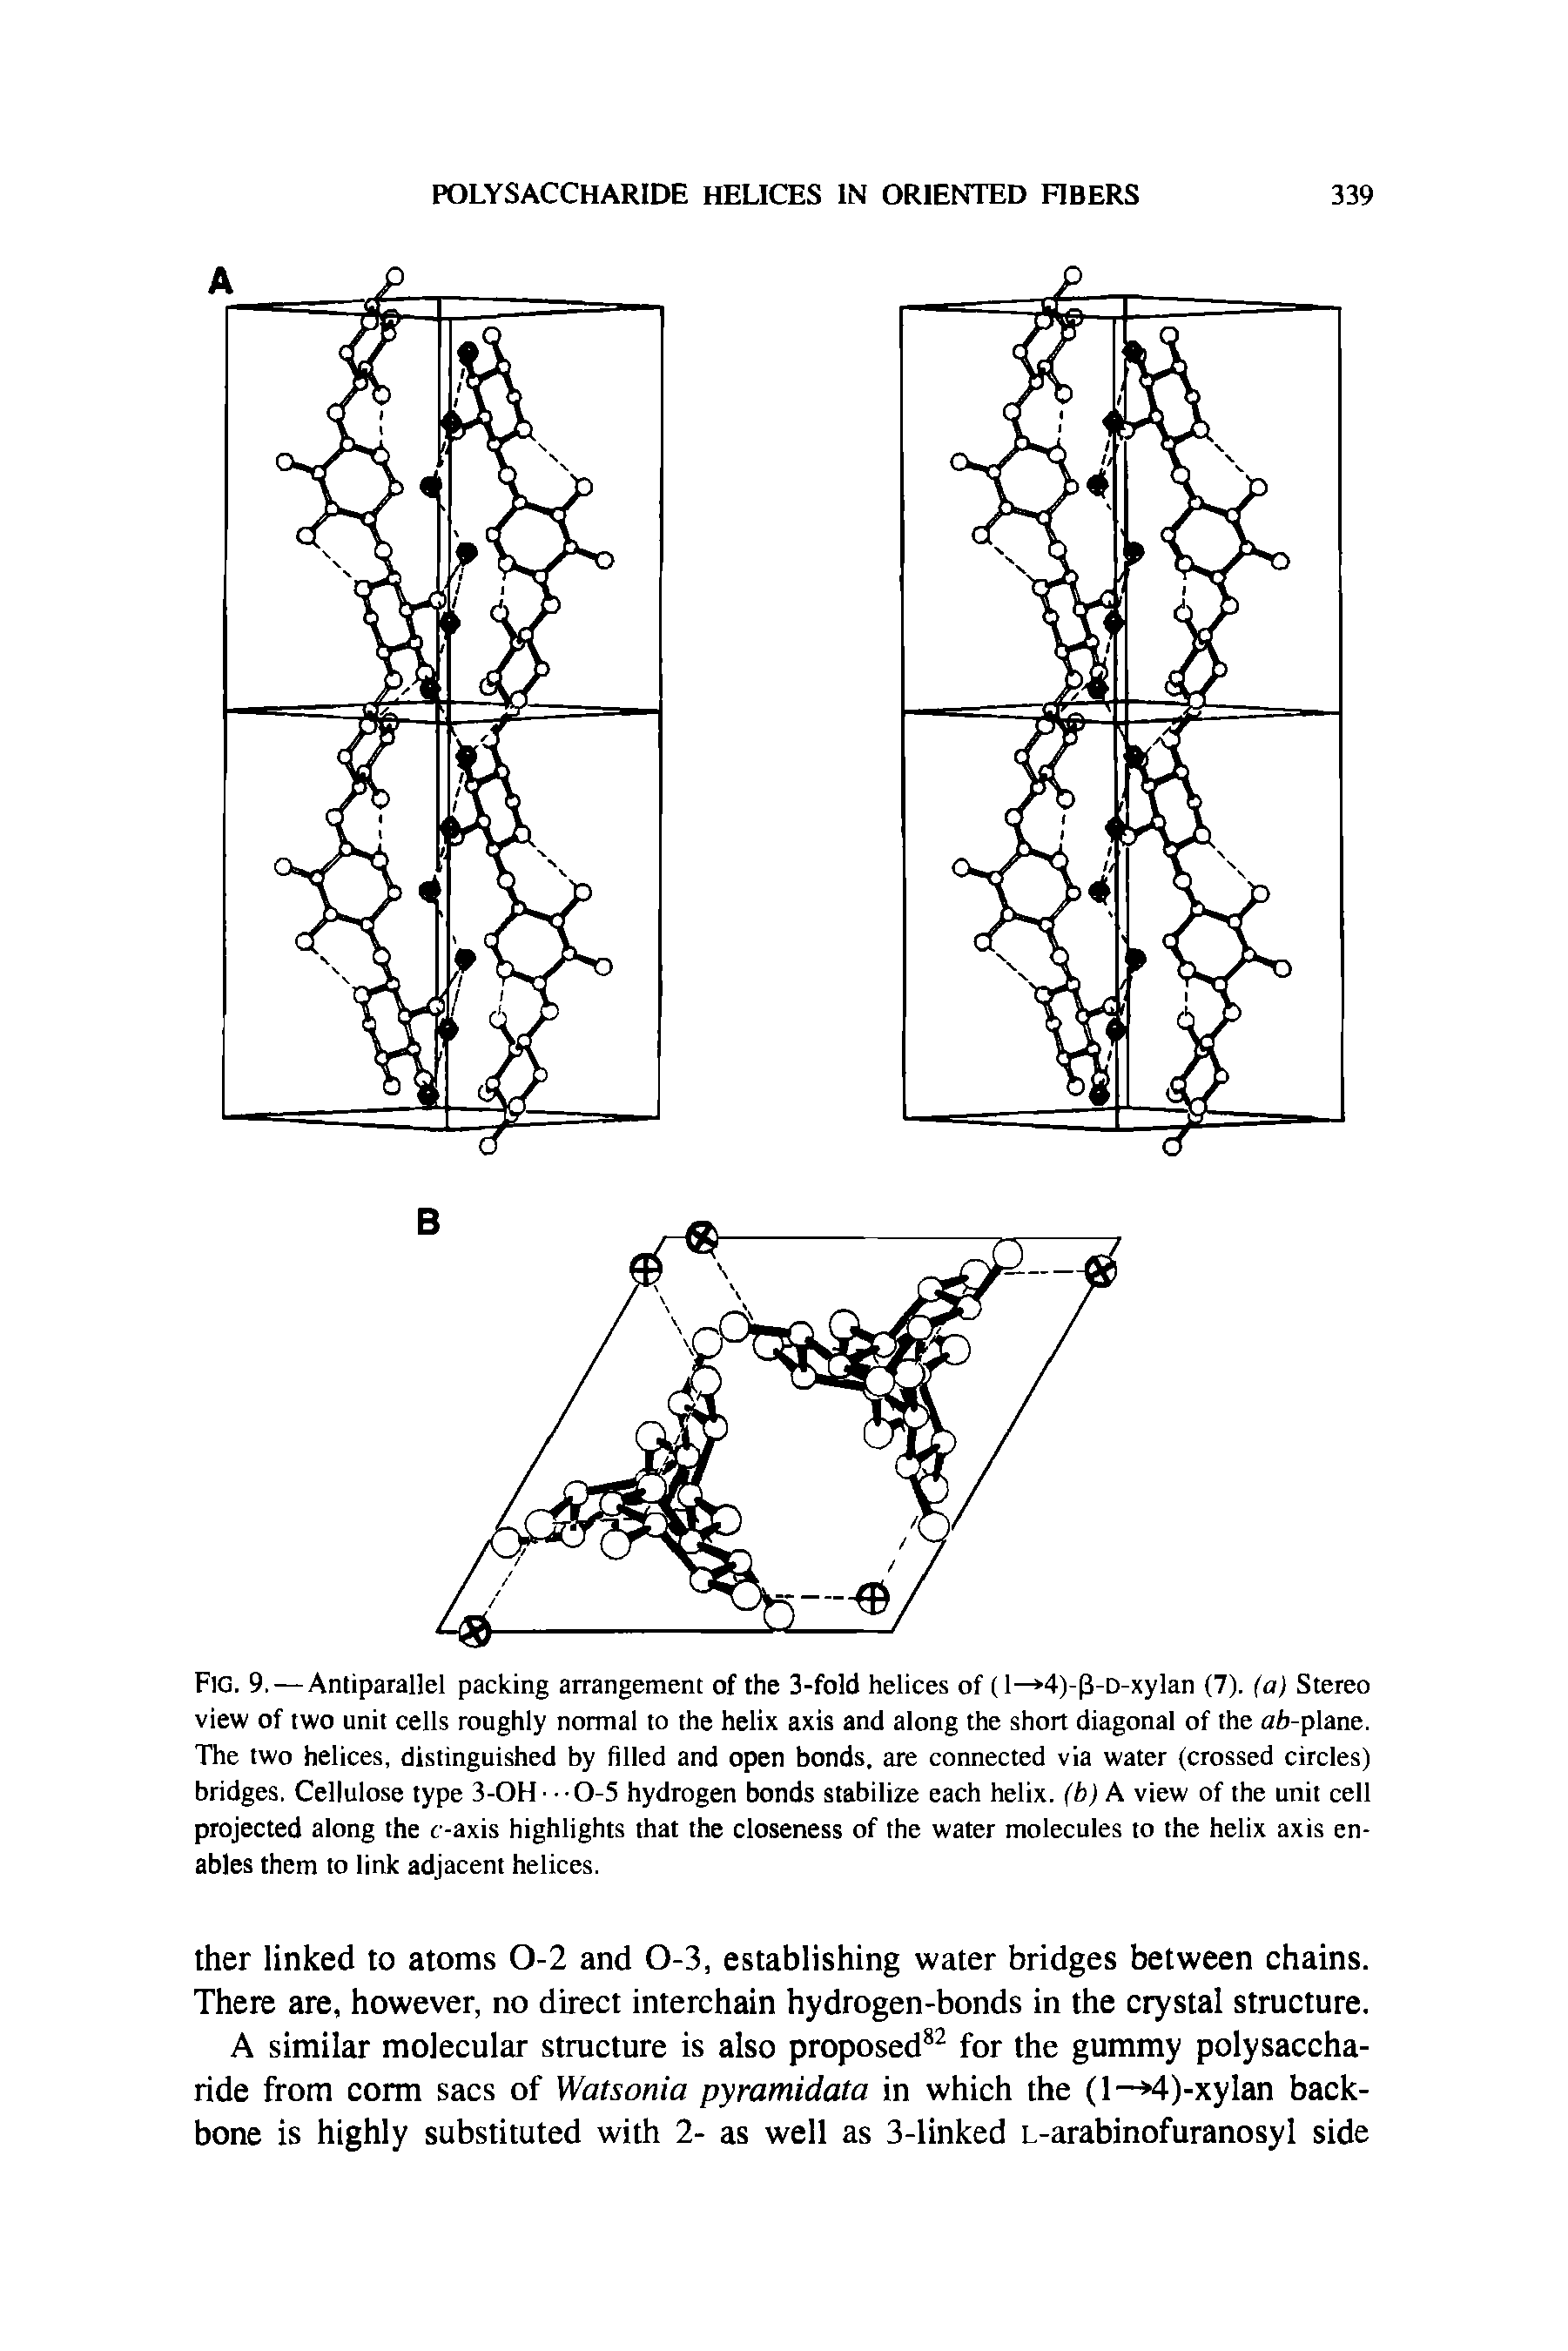 Fig. 9. — Antiparallel packing arrangement of the 3-fold helices of (1— 4)-(3-D-xylan (7). (a) Stereo view of two unit cells roughly normal to the helix axis and along the short diagonal of the ab-plane. The two helices, distinguished by filled and open bonds, are connected via water (crossed circles) bridges. Cellulose type 3-0H-0-5 hydrogen bonds stabilize each helix, (b) A view of the unit cell projected along the r-axis highlights that the closeness of the water molecules to the helix axis enables them to link adjacent helices.